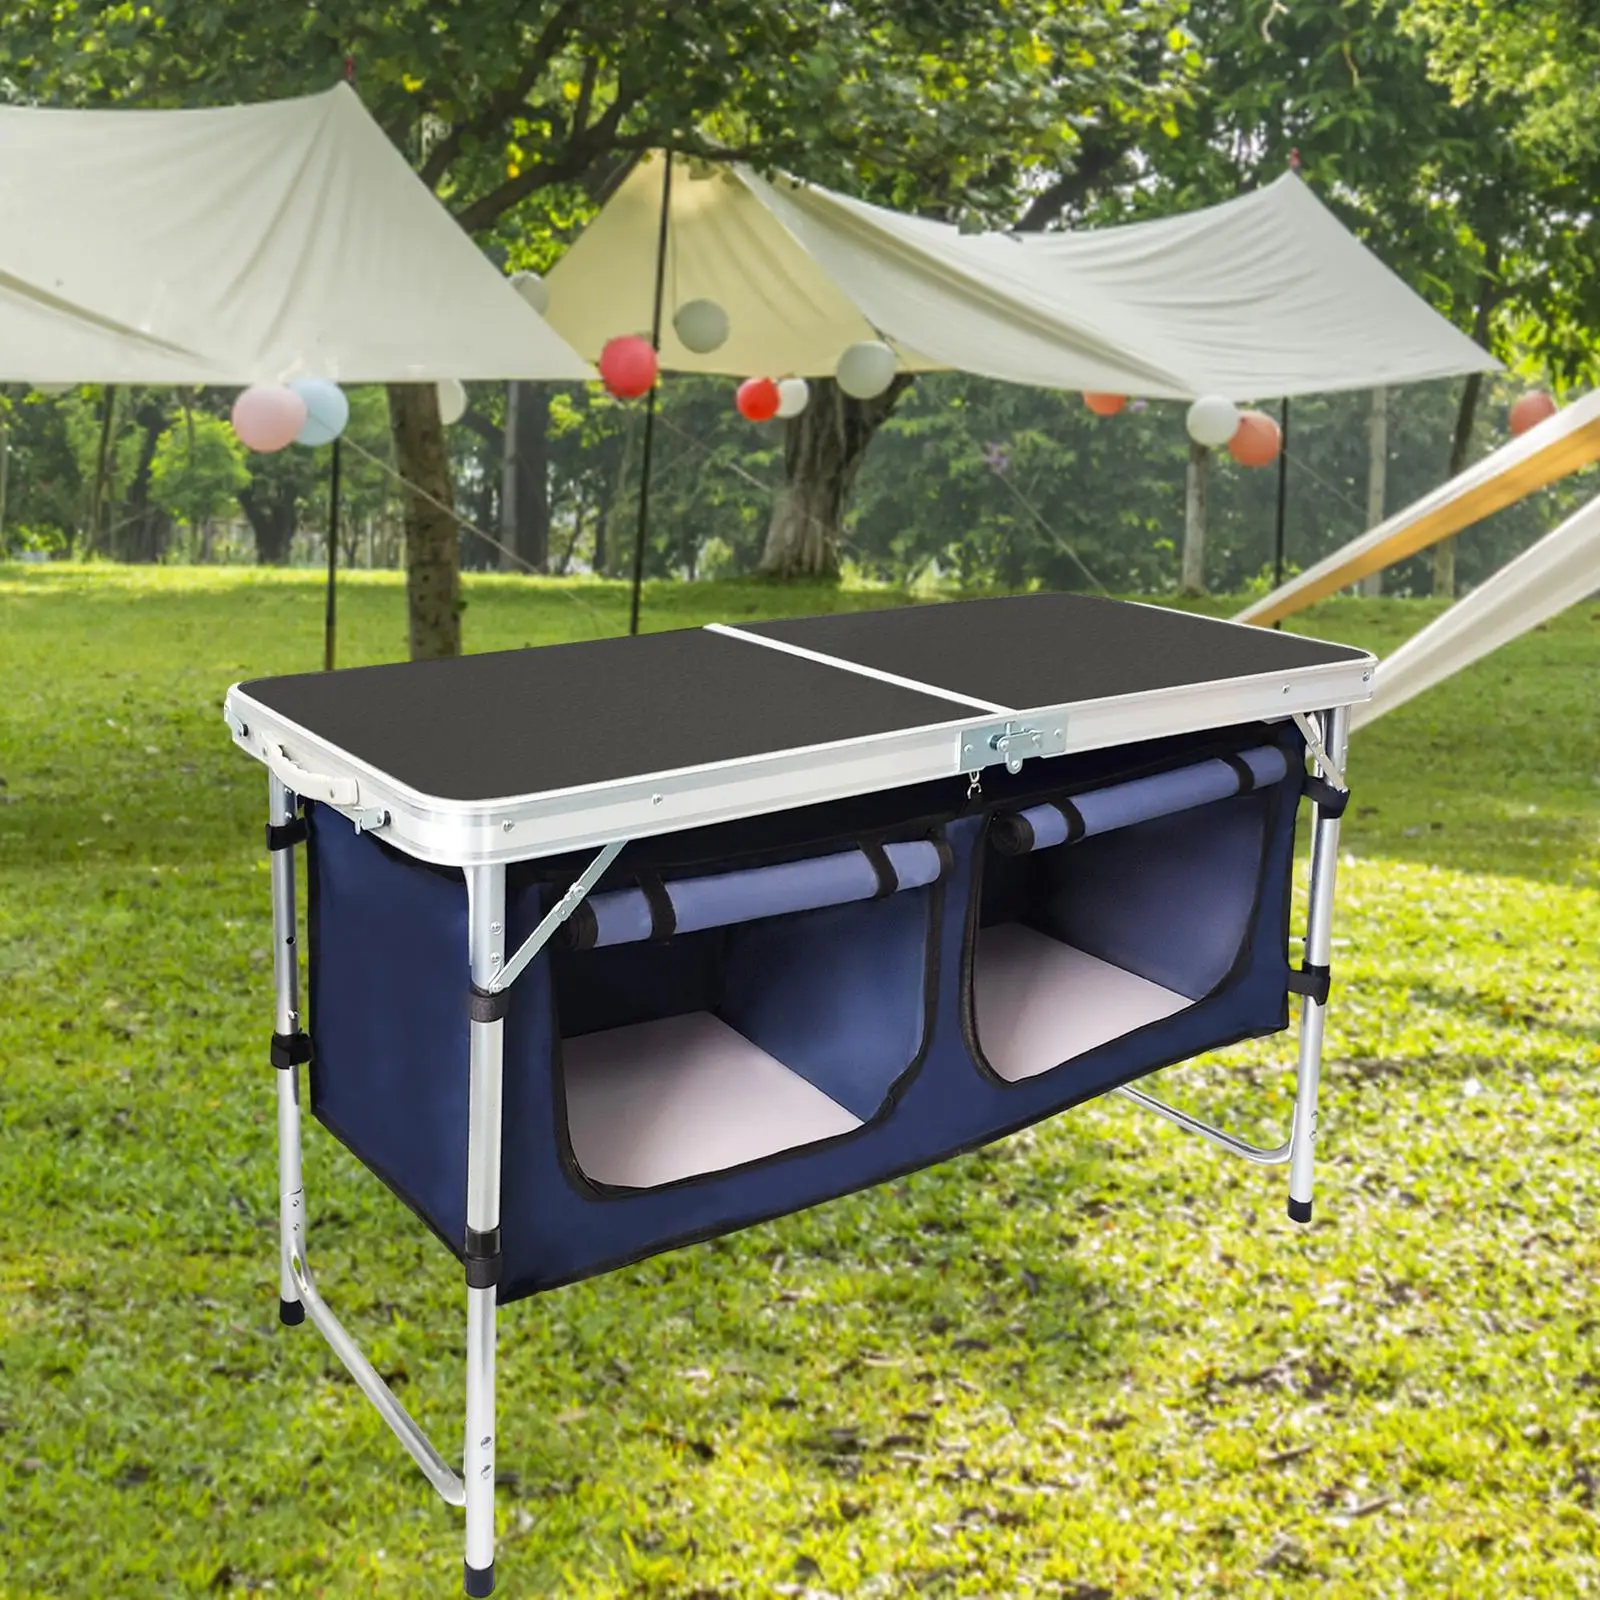 Folding Courtyard Table Lightweight Adjustable Height Outdoor Folding Table Camping Table for Camping BBQ Travel Beach Party